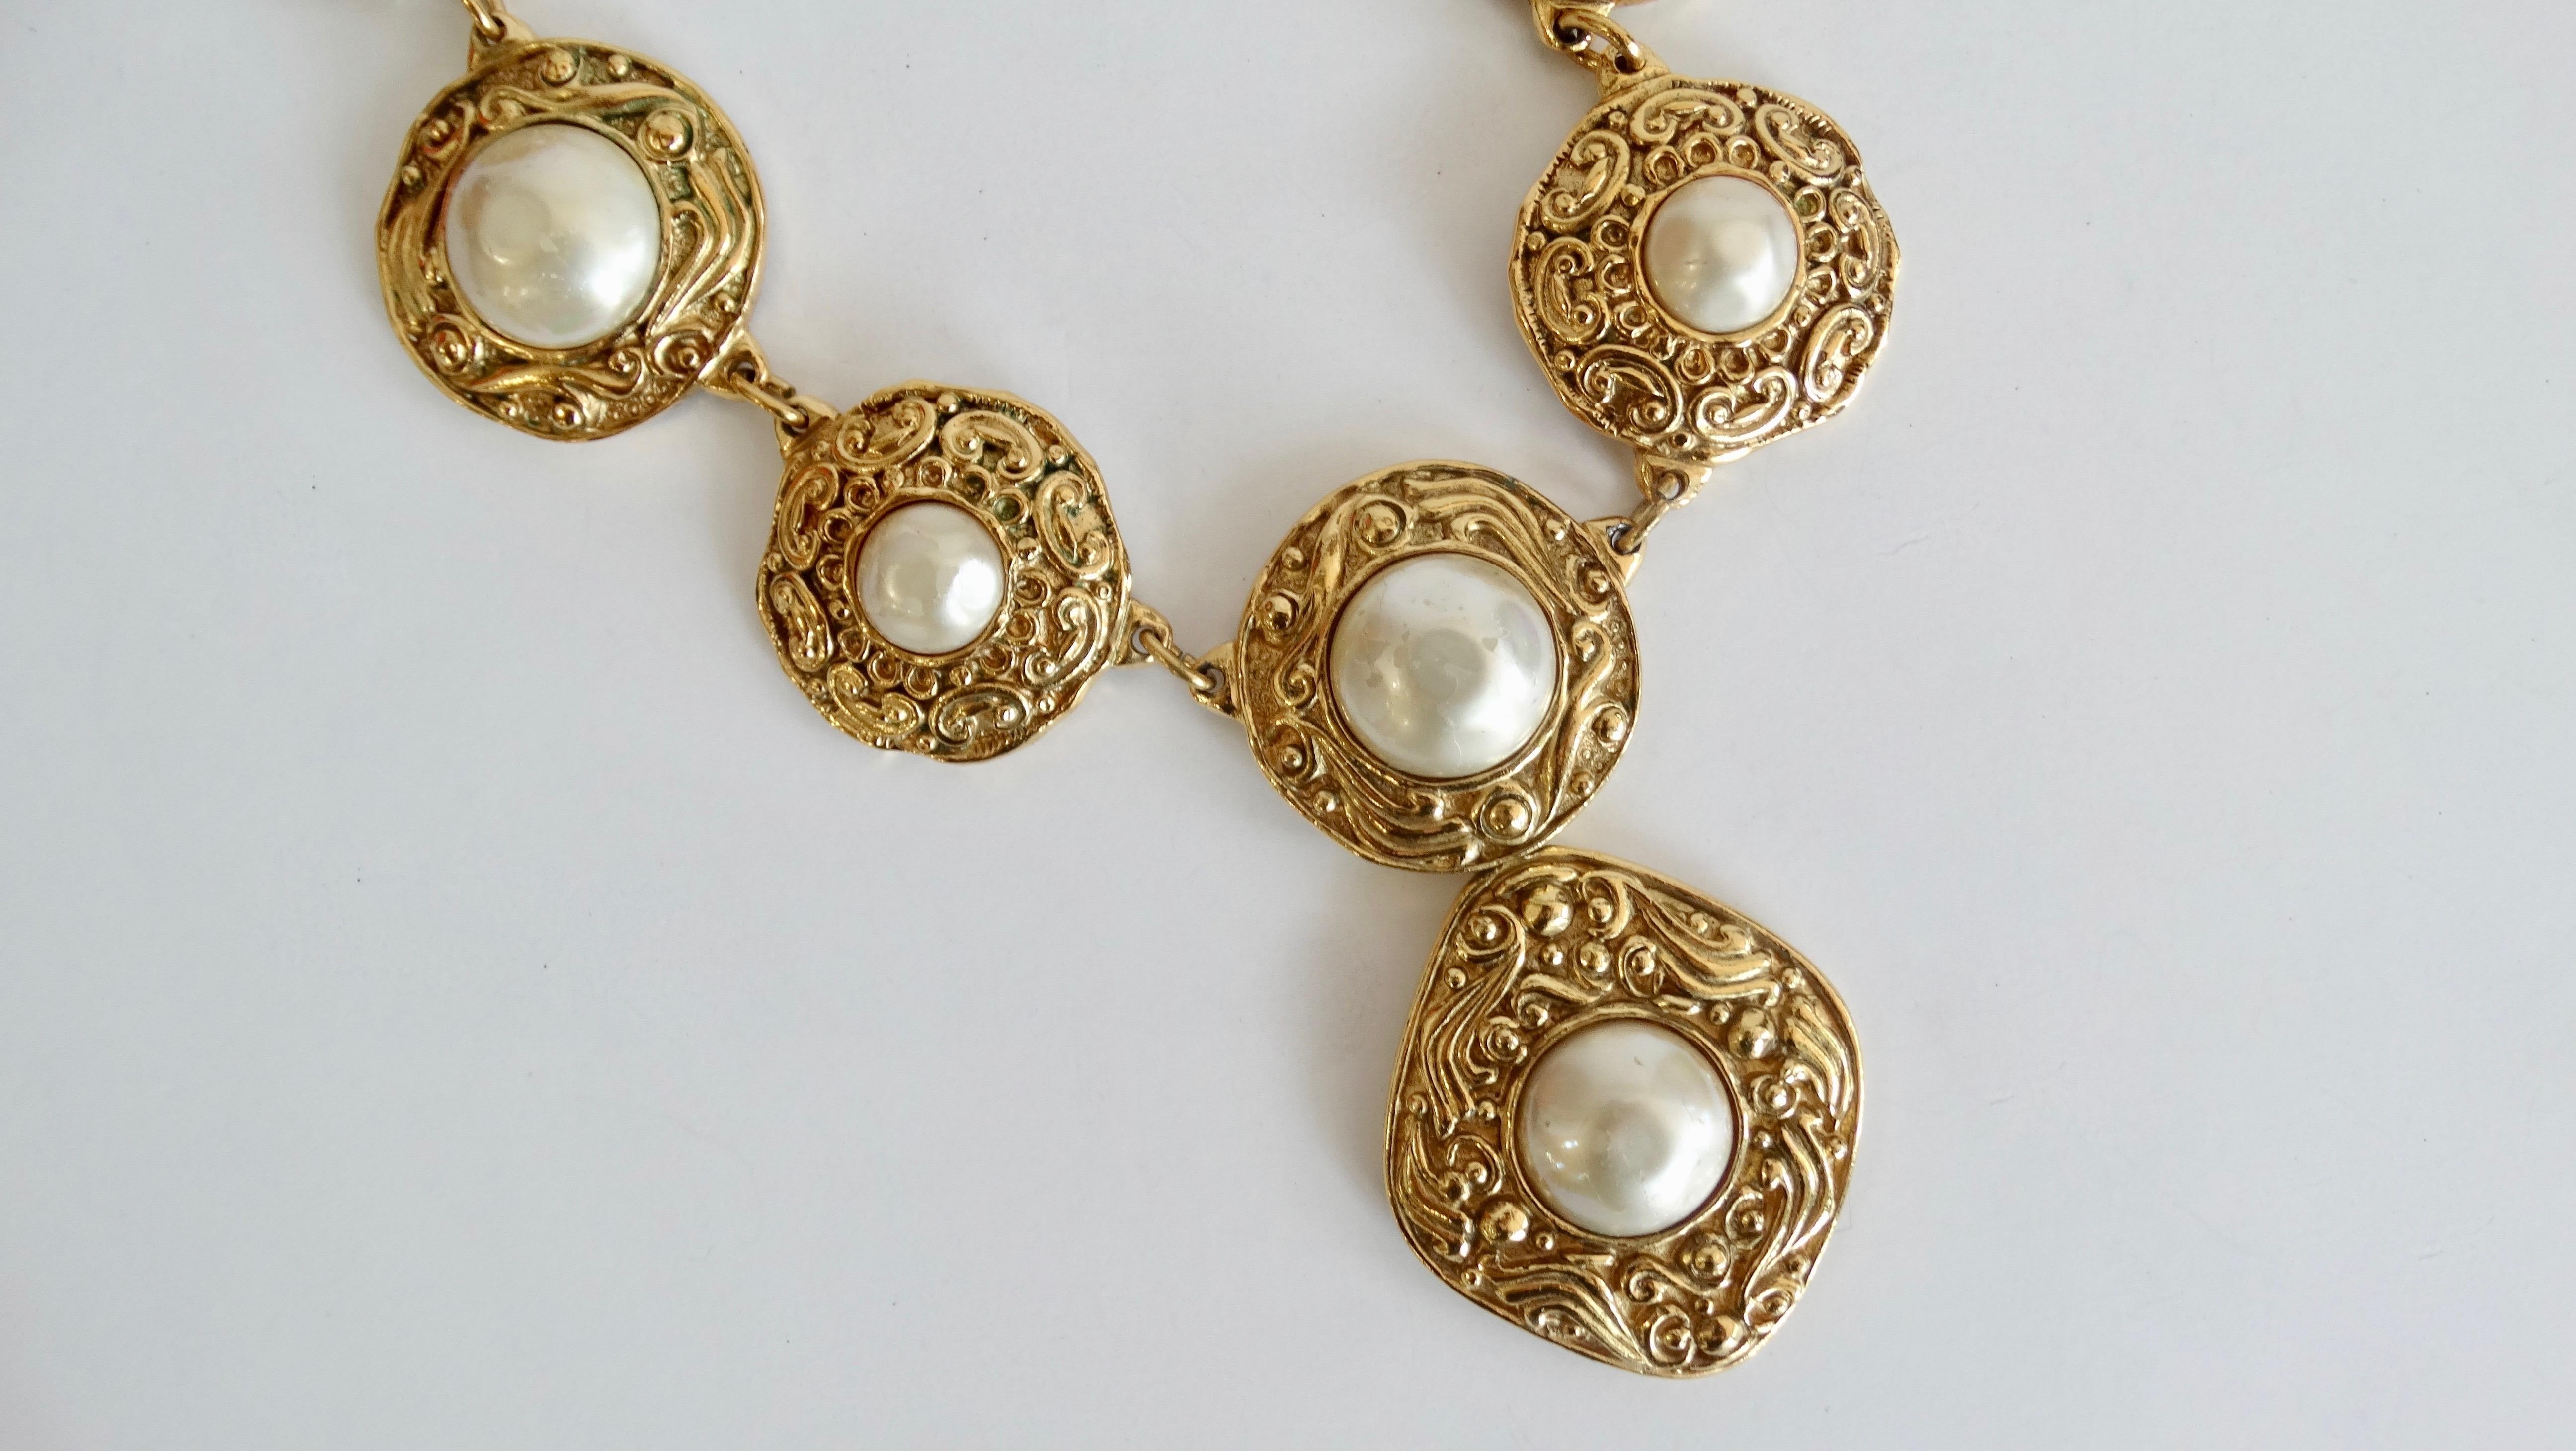 Complete your collection with this vintage Chanel statement piece! Circa early 1980s, this necklace features ornate linked  pendants featuring a faux pearl inside a decoratively carved gold plated round setting. Includes a diamond shaped drop